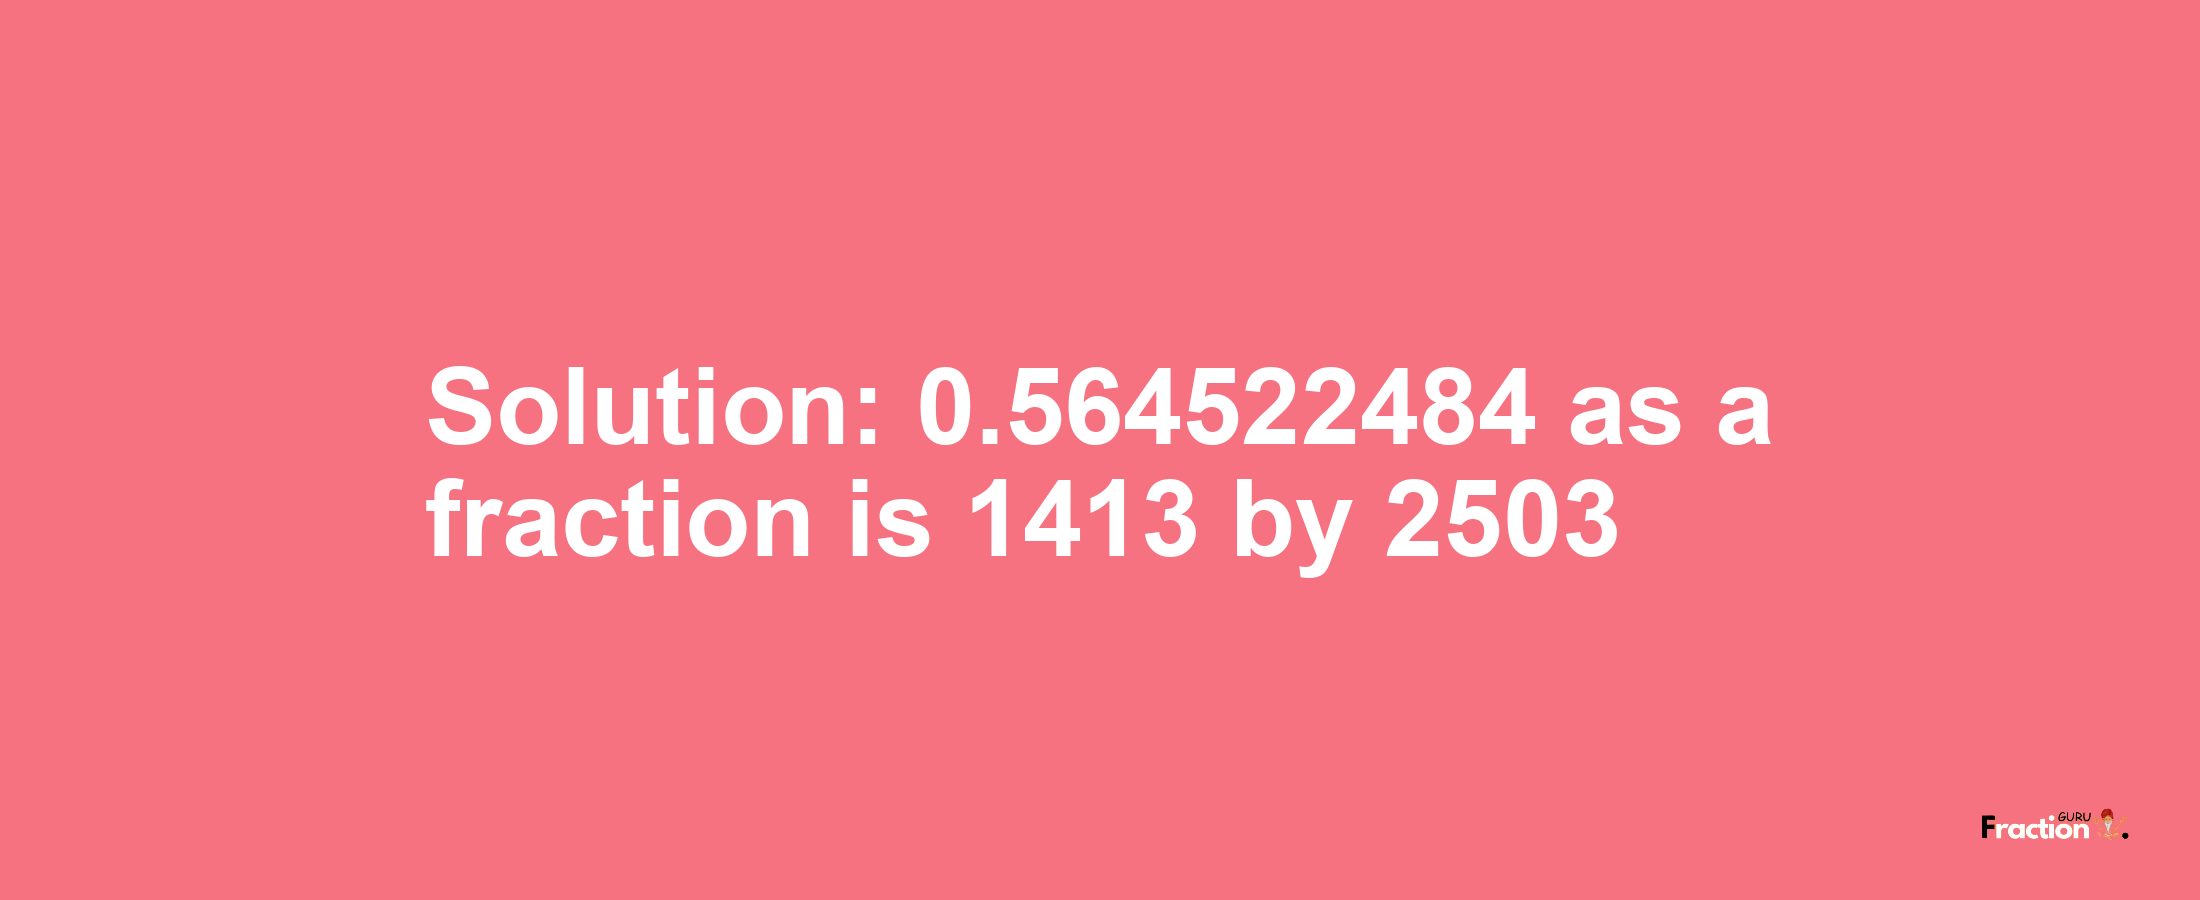 Solution:0.564522484 as a fraction is 1413/2503